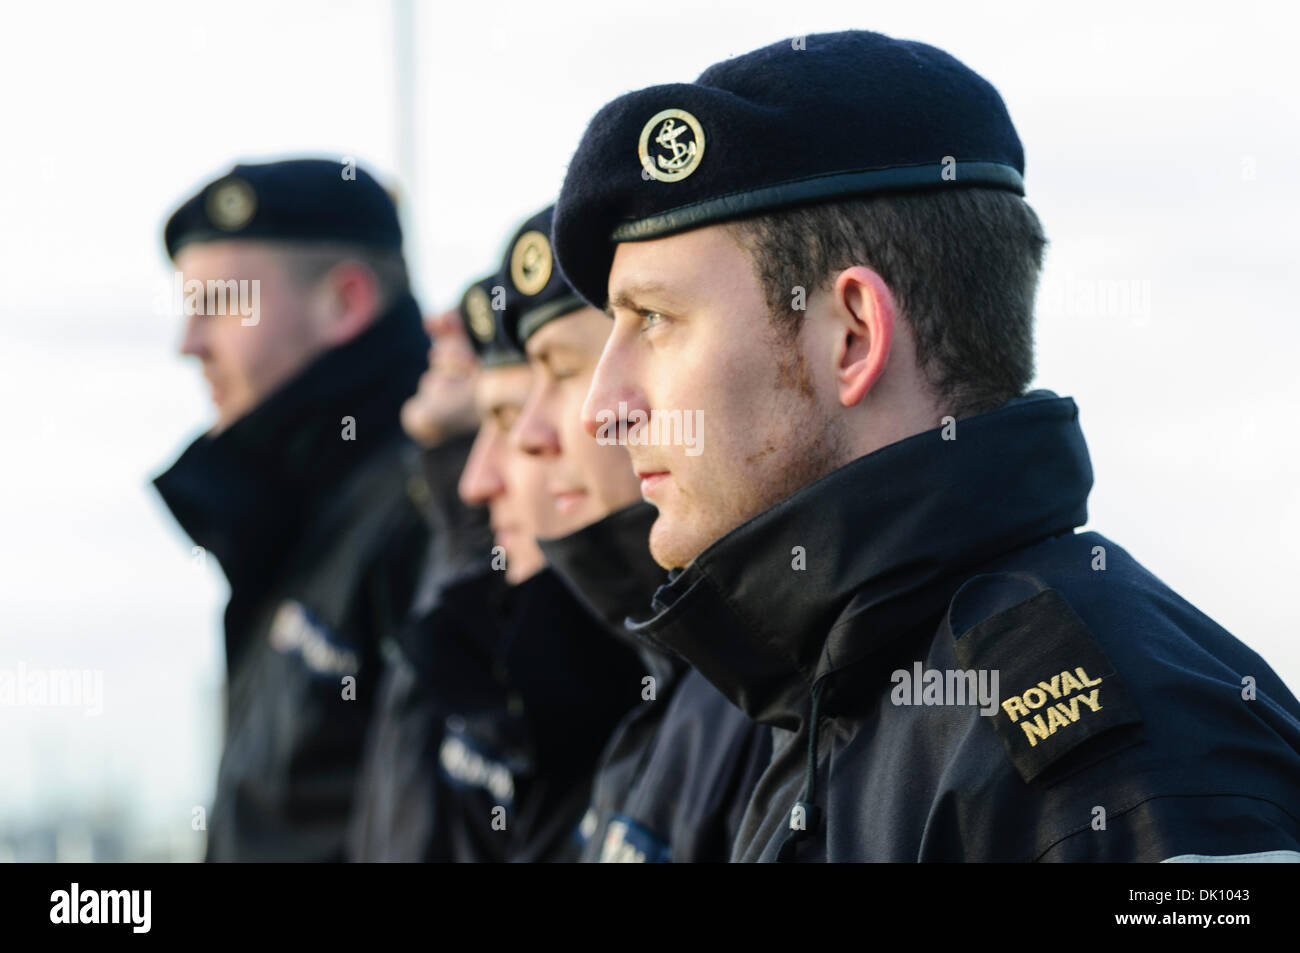 Belfast, Northern Ireland. 30th Nov 2013 - Sailors on HMS Monmouth, a Royal Navy type 23 Frigate, line up as the ship is about to berth. Credit:  Stephen Barnes/Alamy Live News Stock Photo